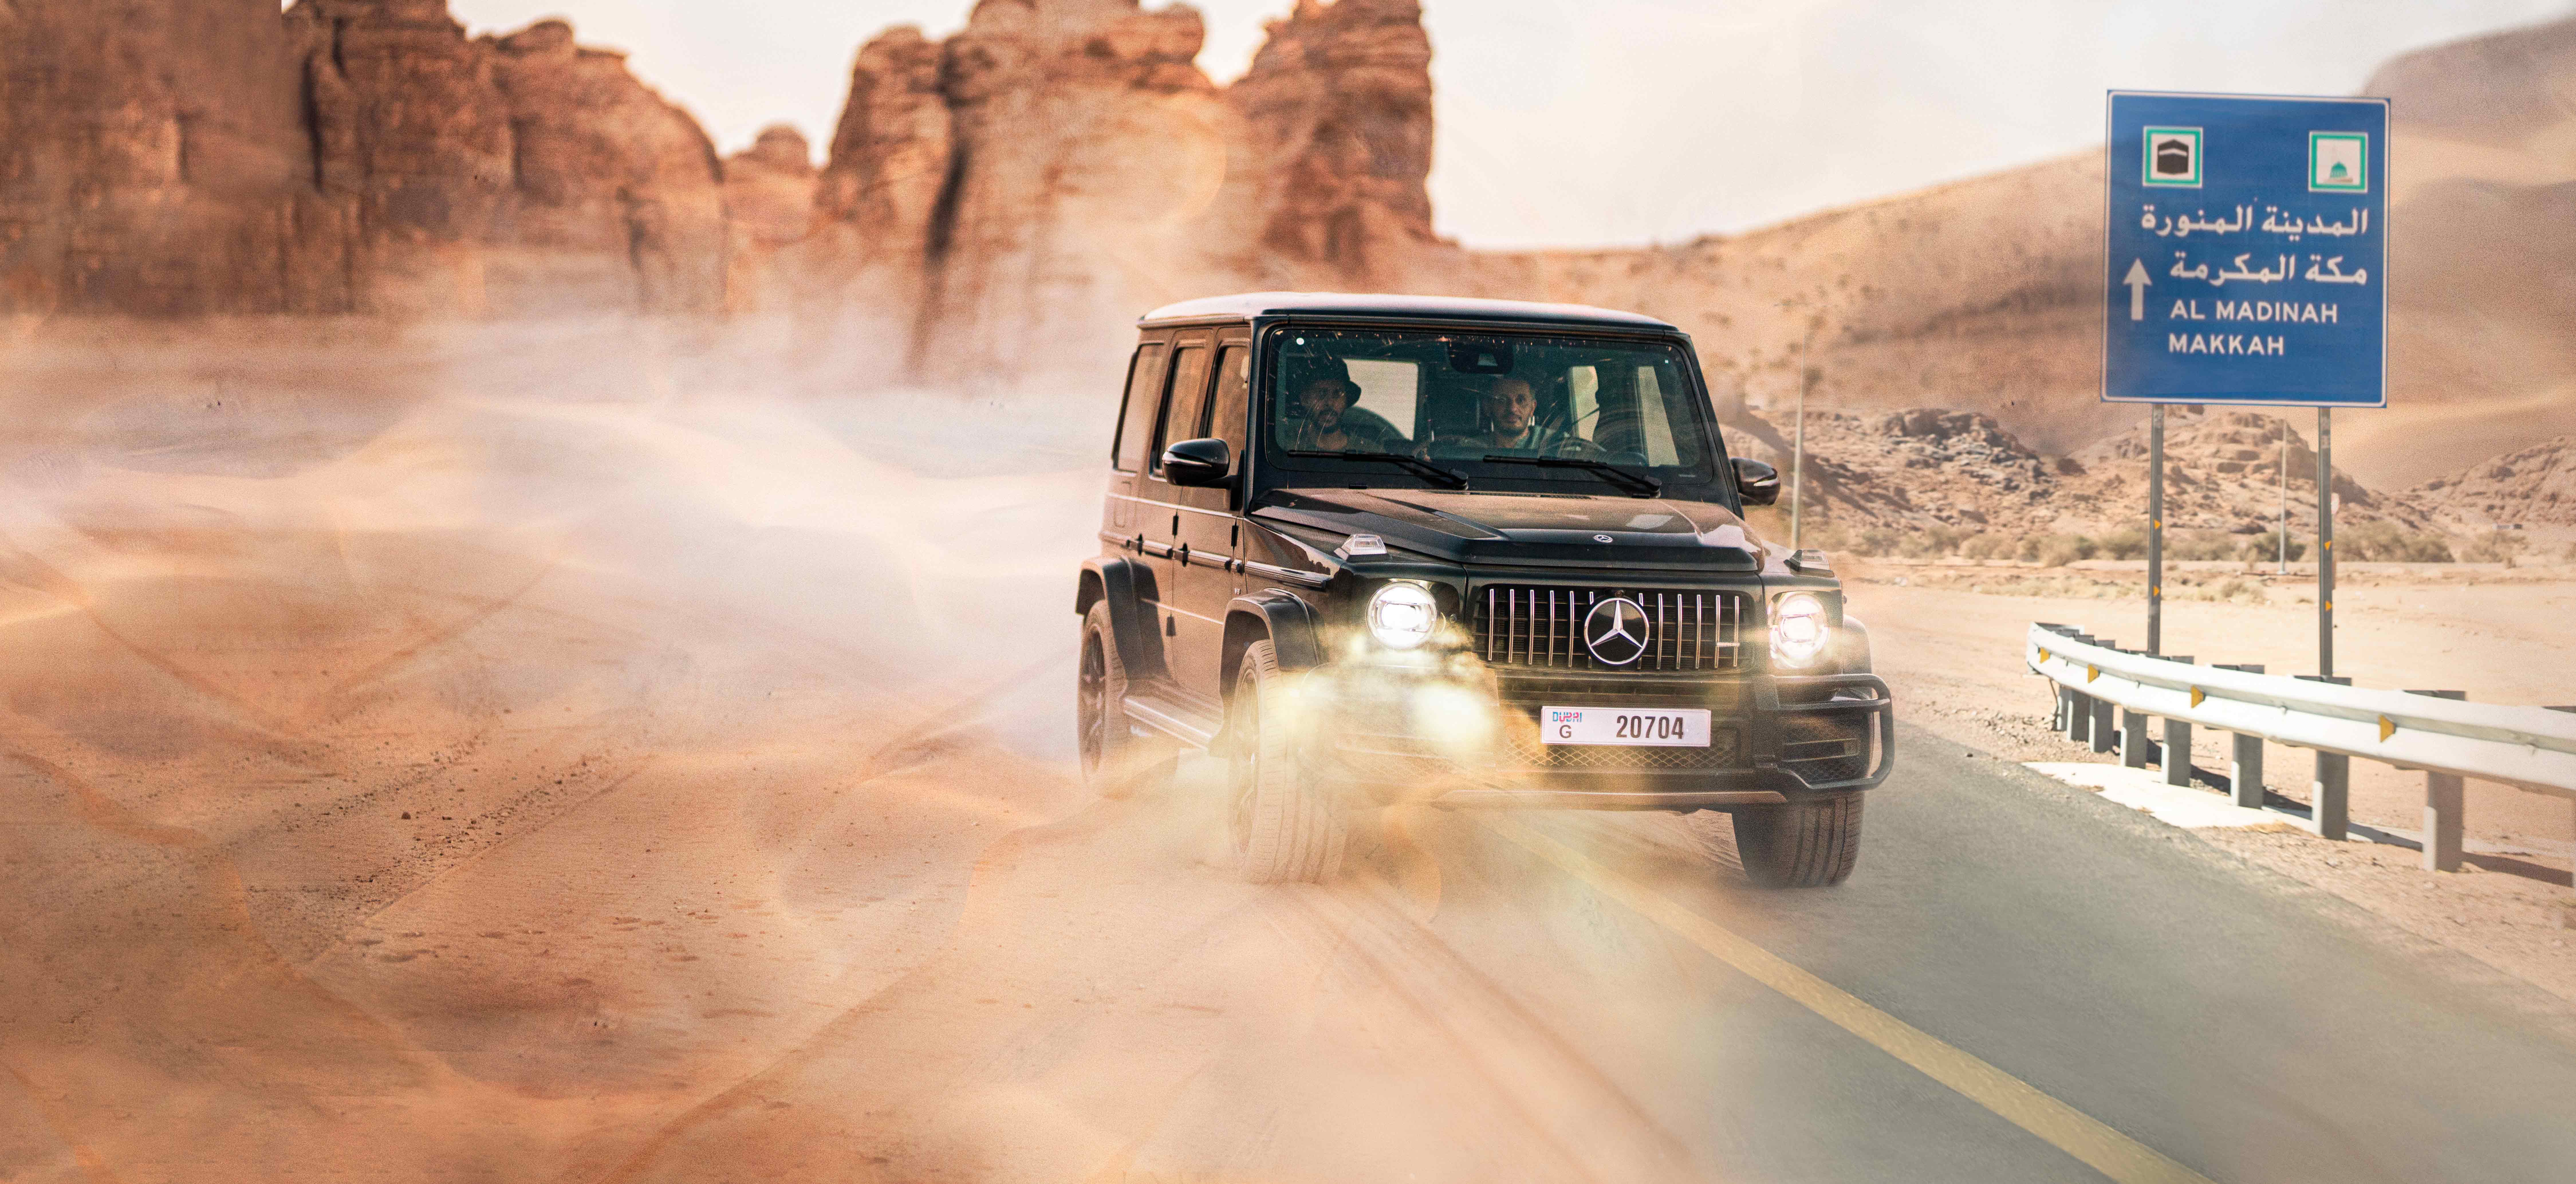 Mercedes-Benz Cars Middle East Launches ‘Road to Mecca’  Ramadan Campaign